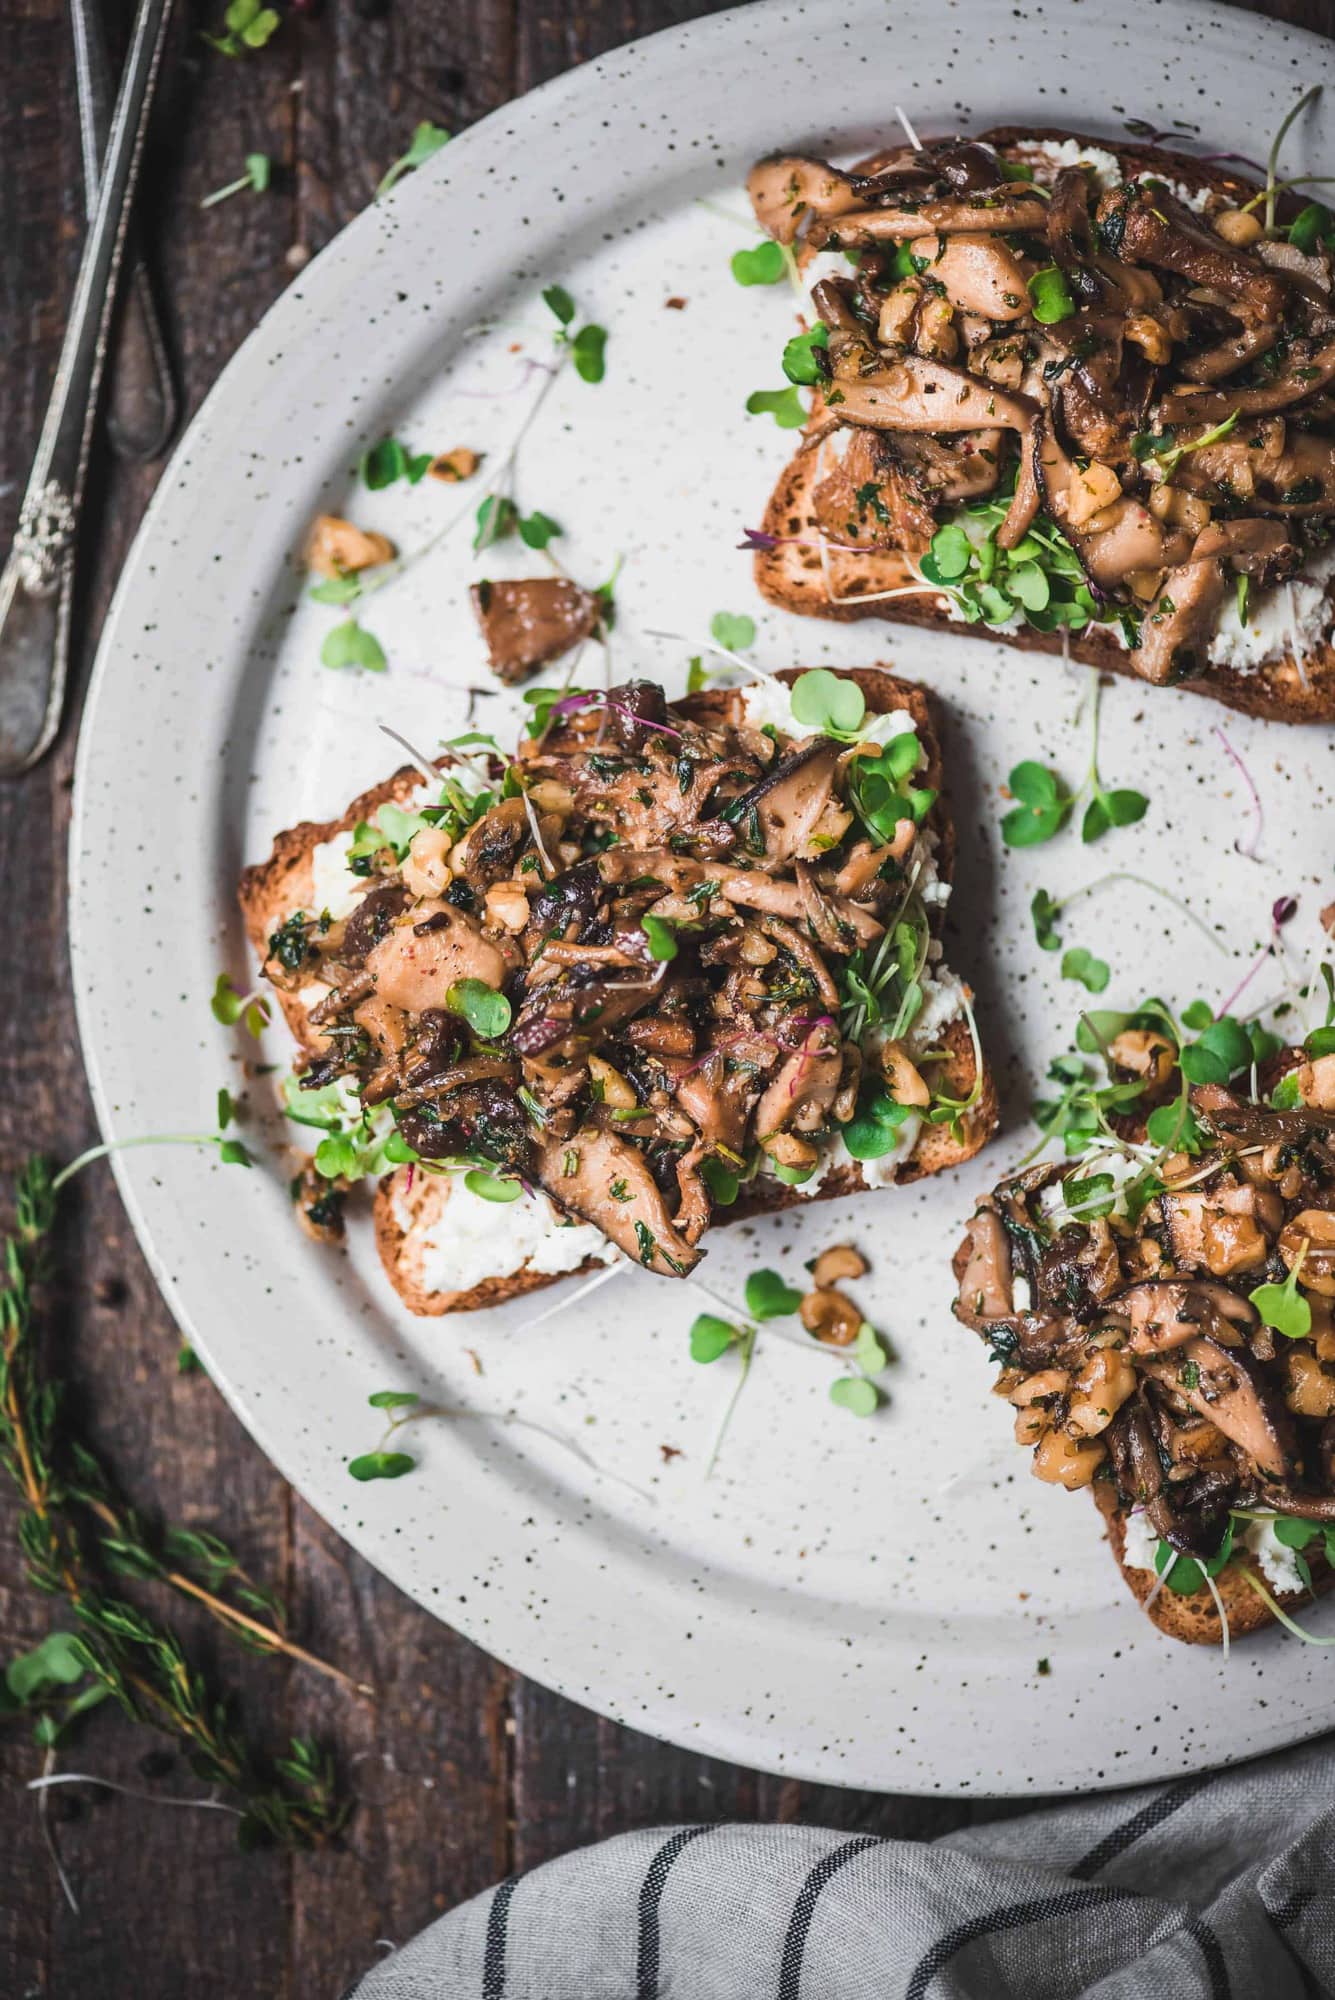 Toast topped with ricotta, sauteed mushrooms and microgreens on a white plate